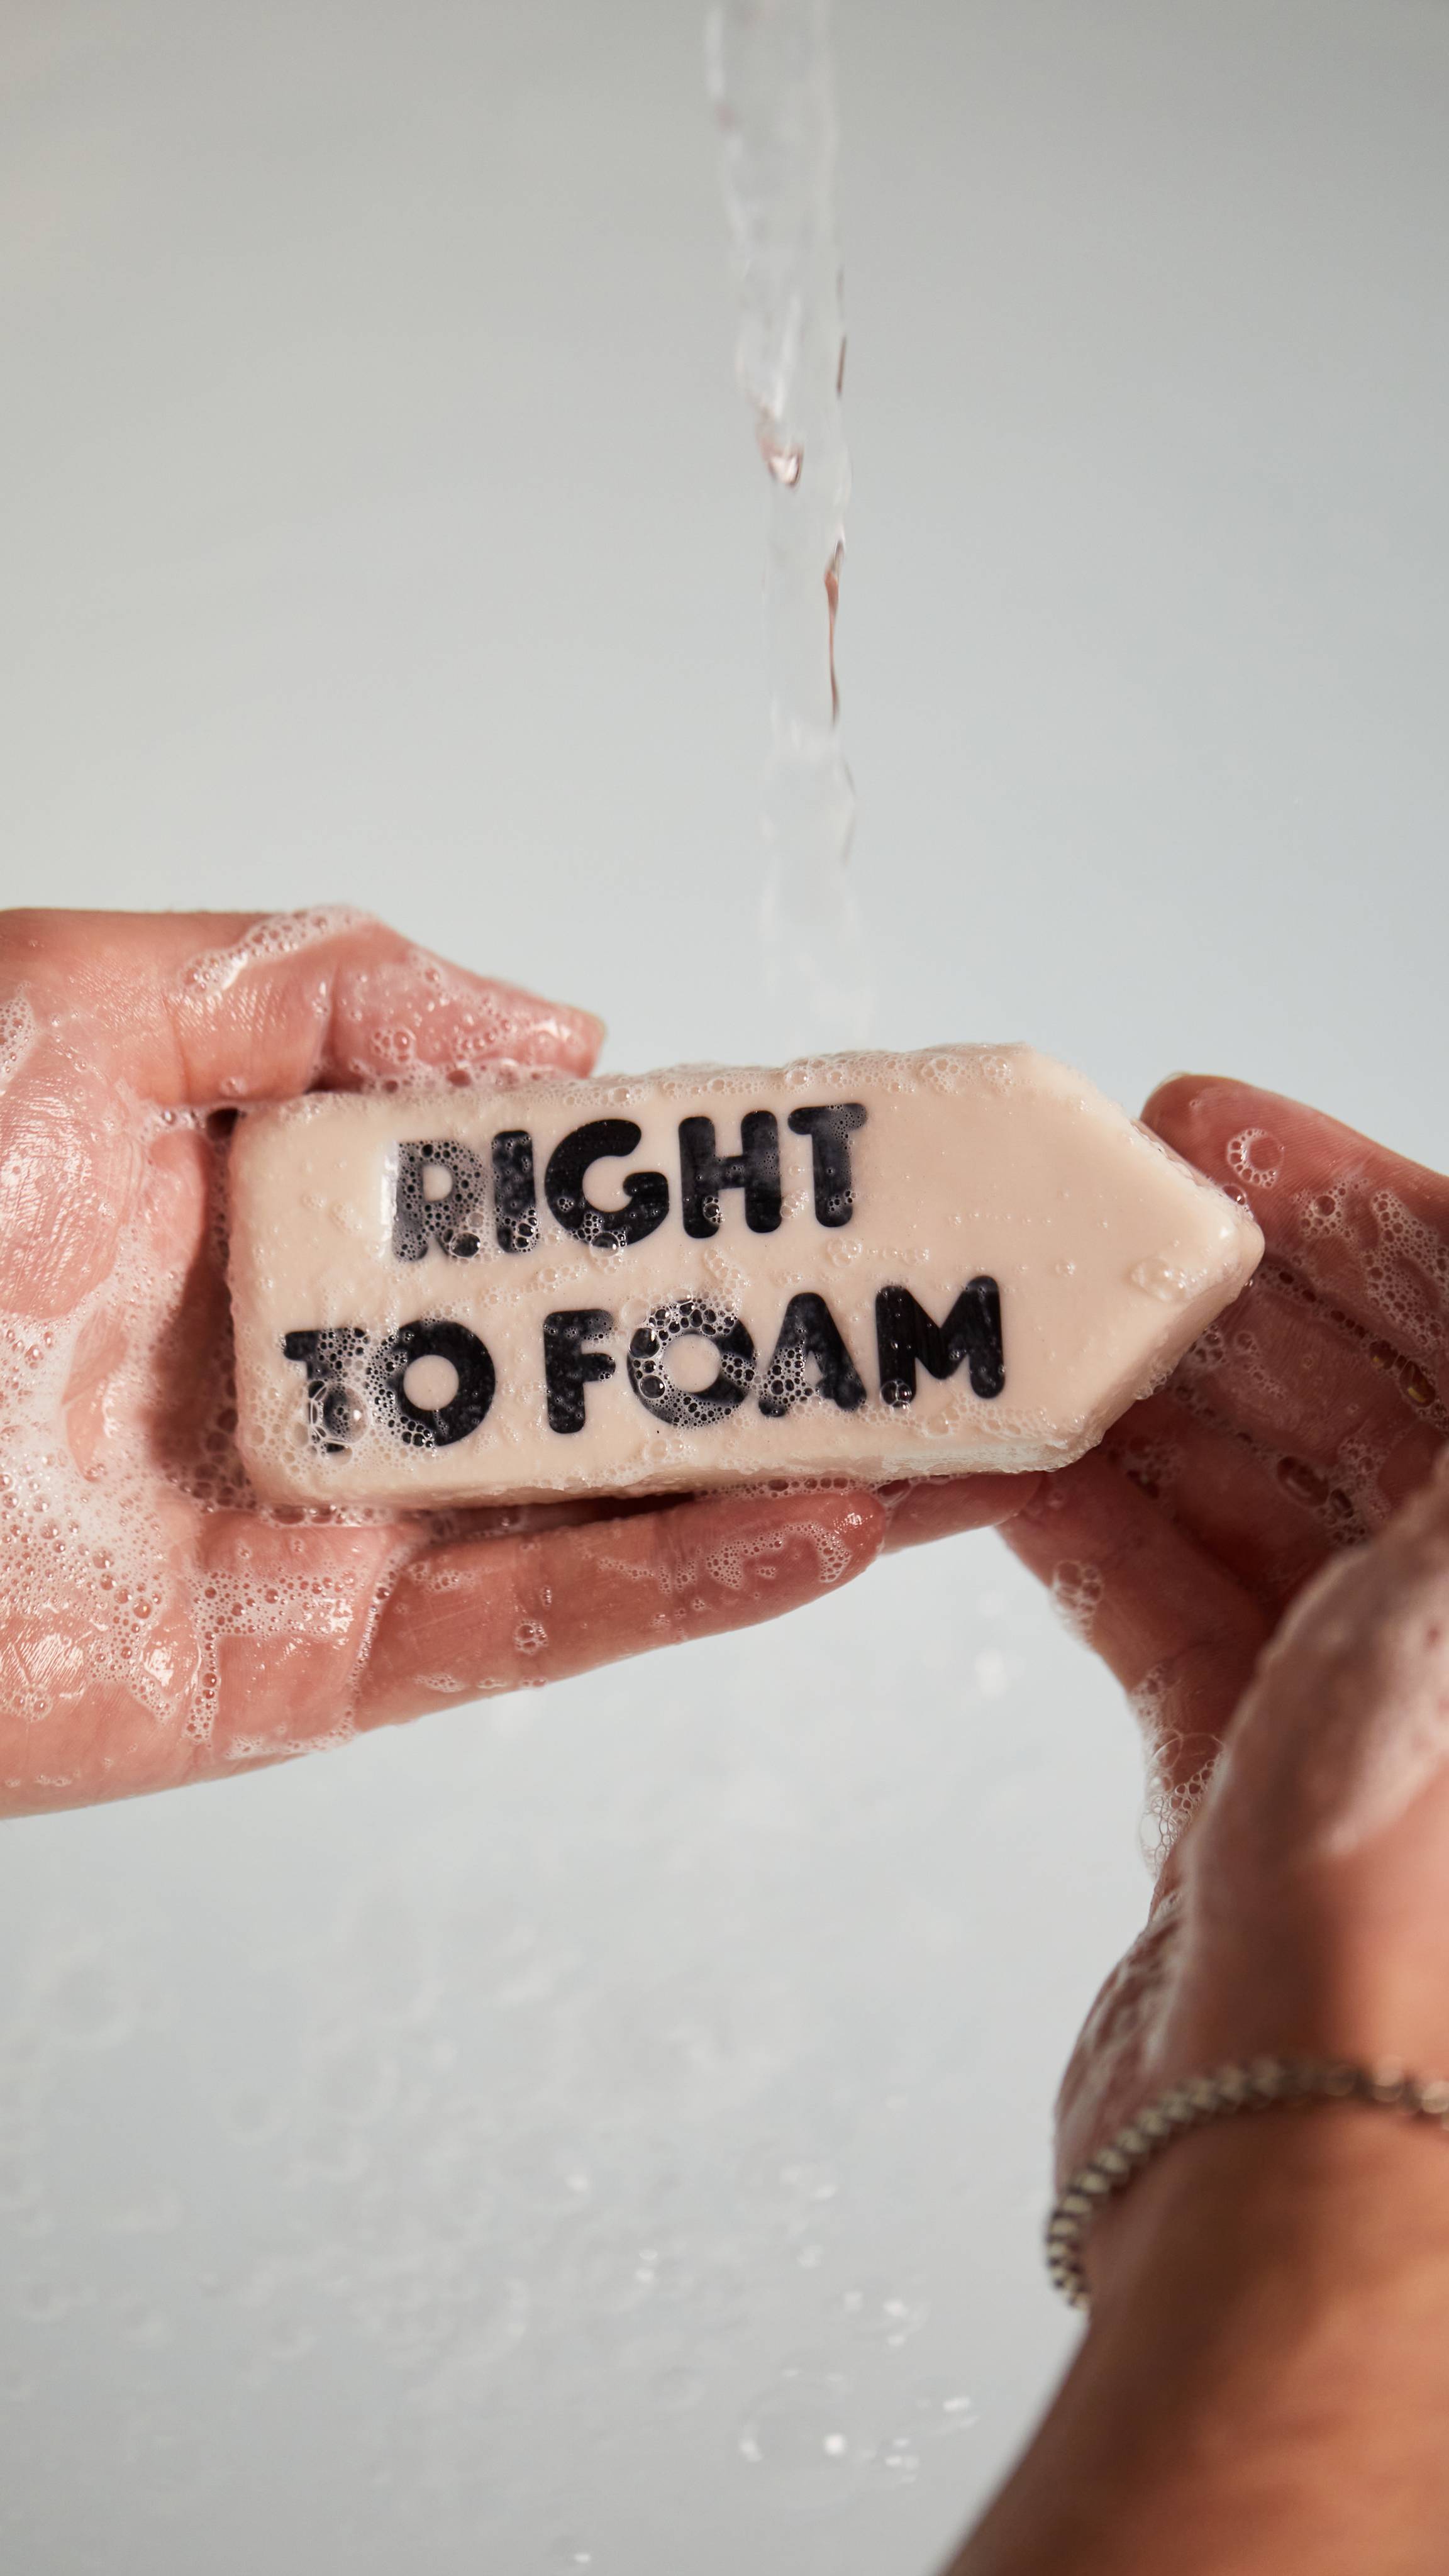 Image shows a close-up of the model's hands as they create a lather with the Right to Foam soap under running water.